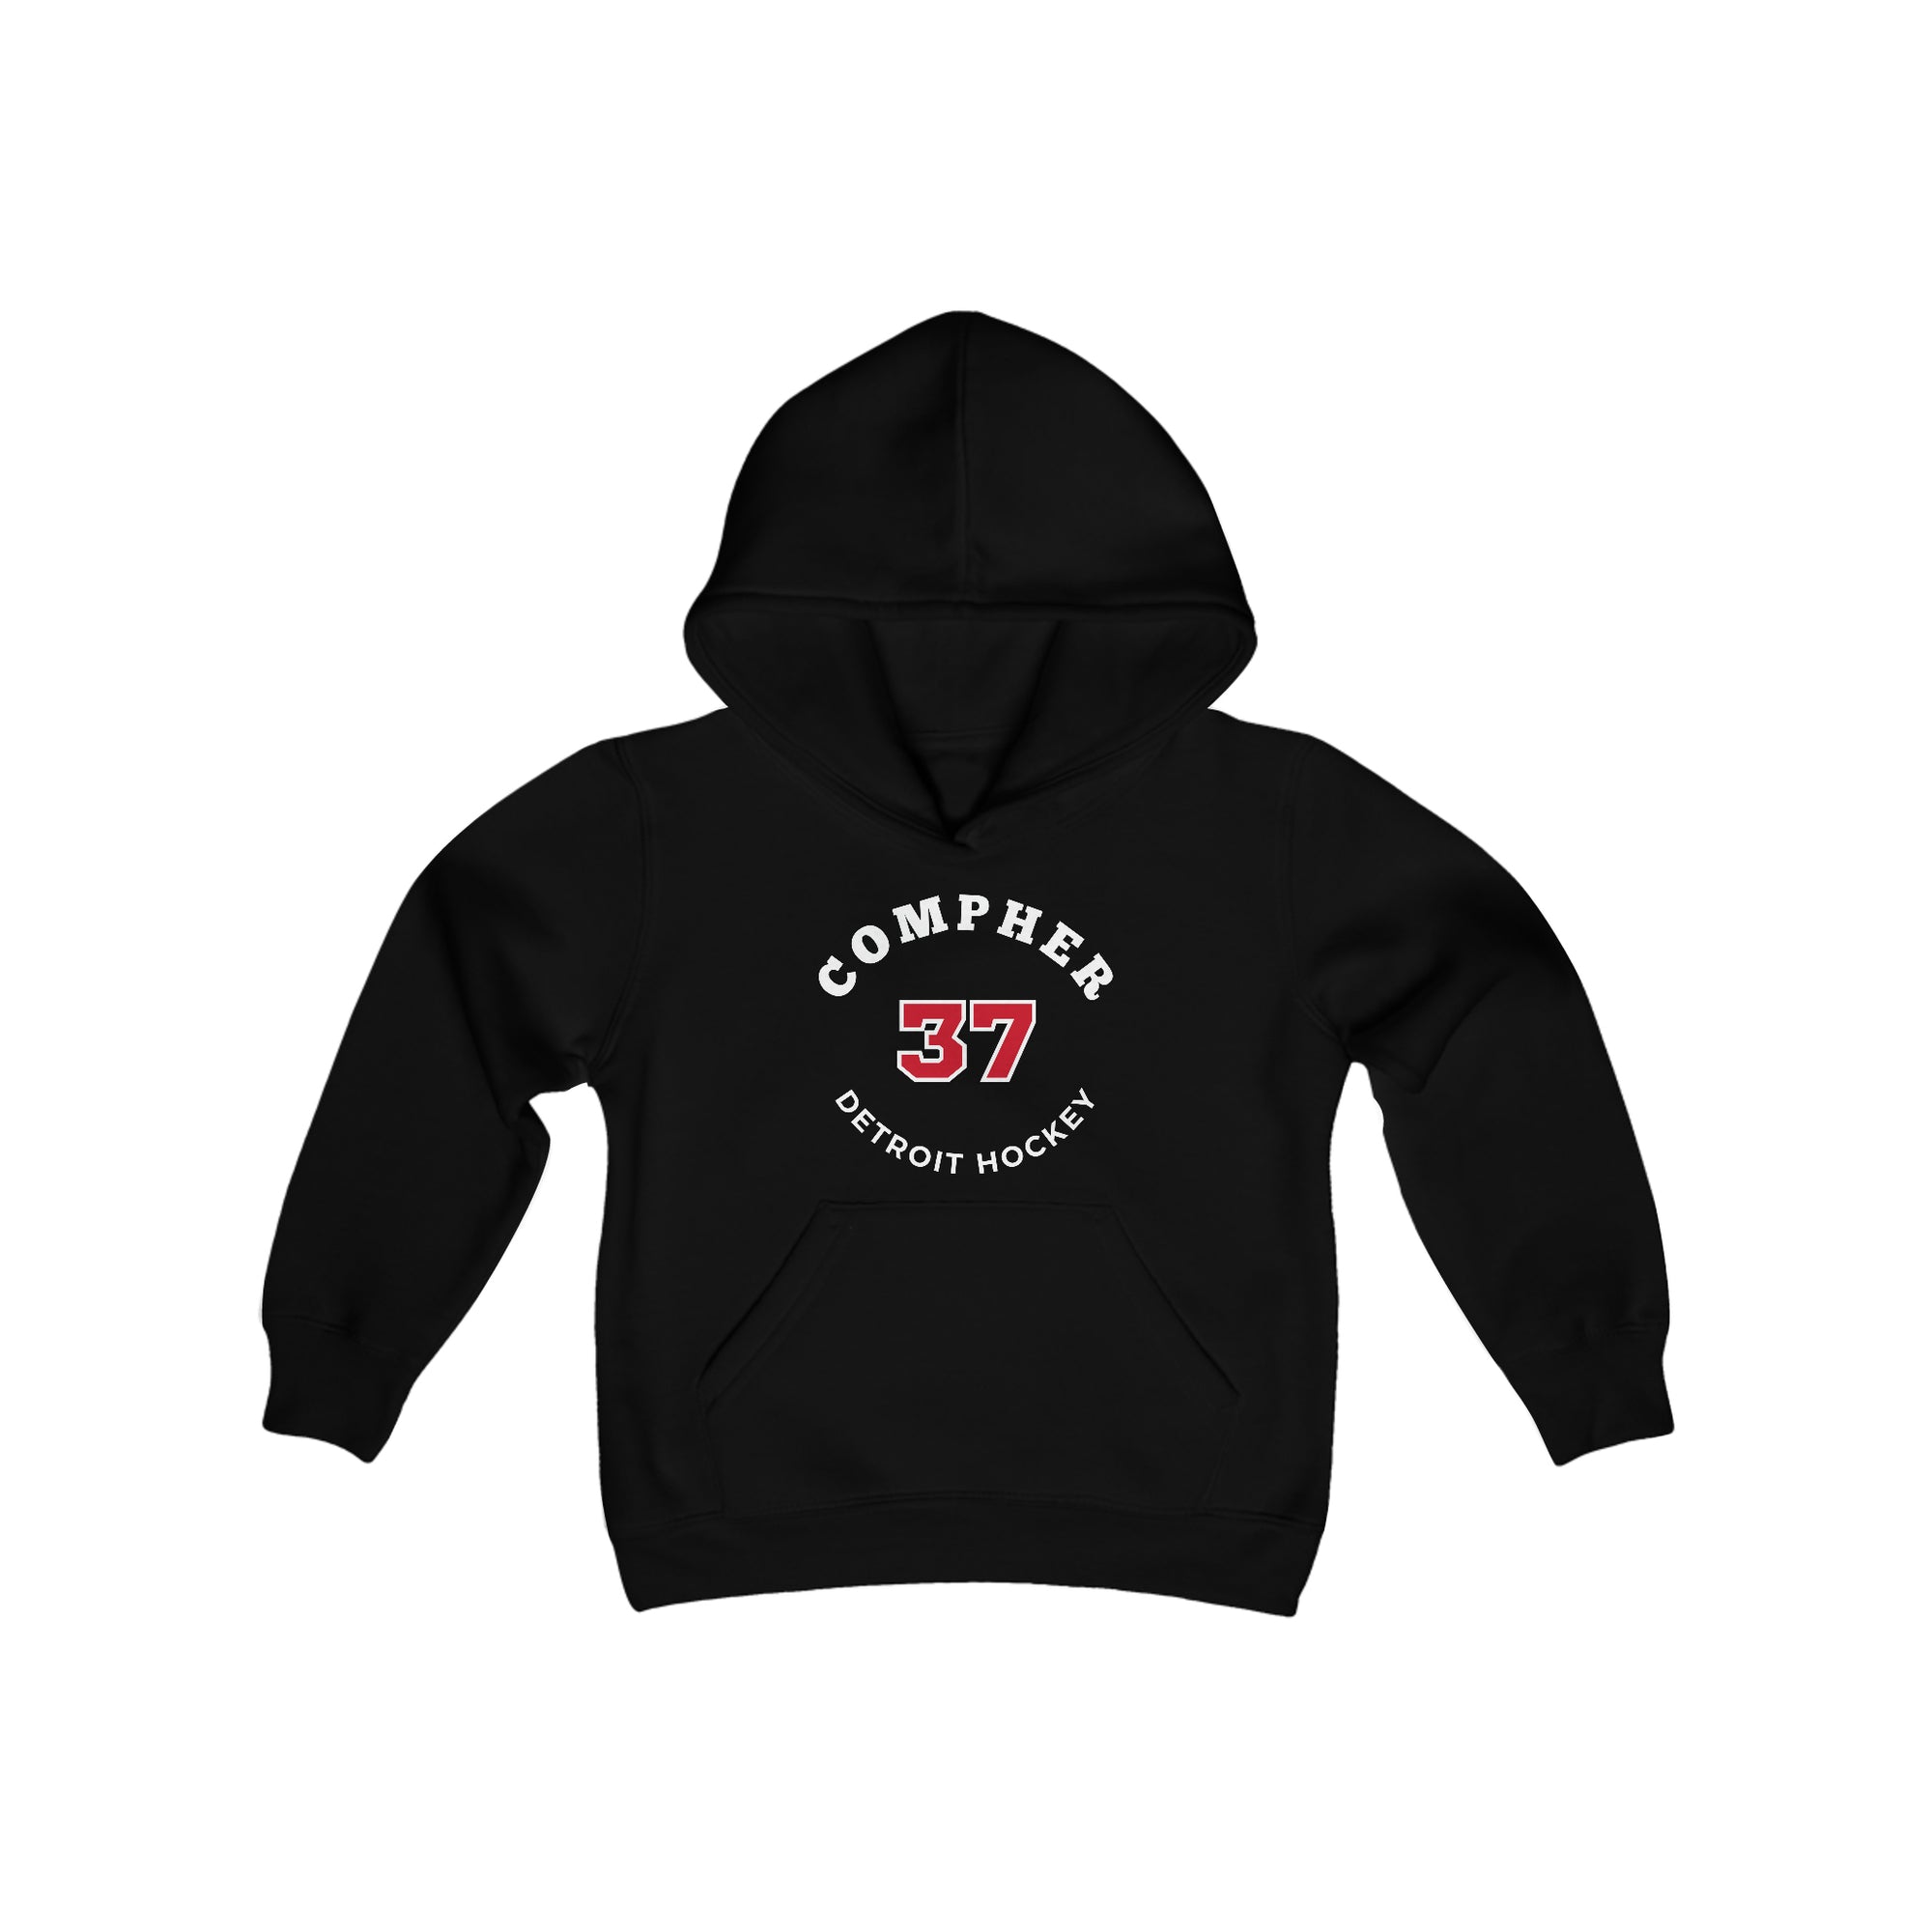 Compher 37 Detroit Hockey Number Arch Design Youth Hooded Sweatshirt